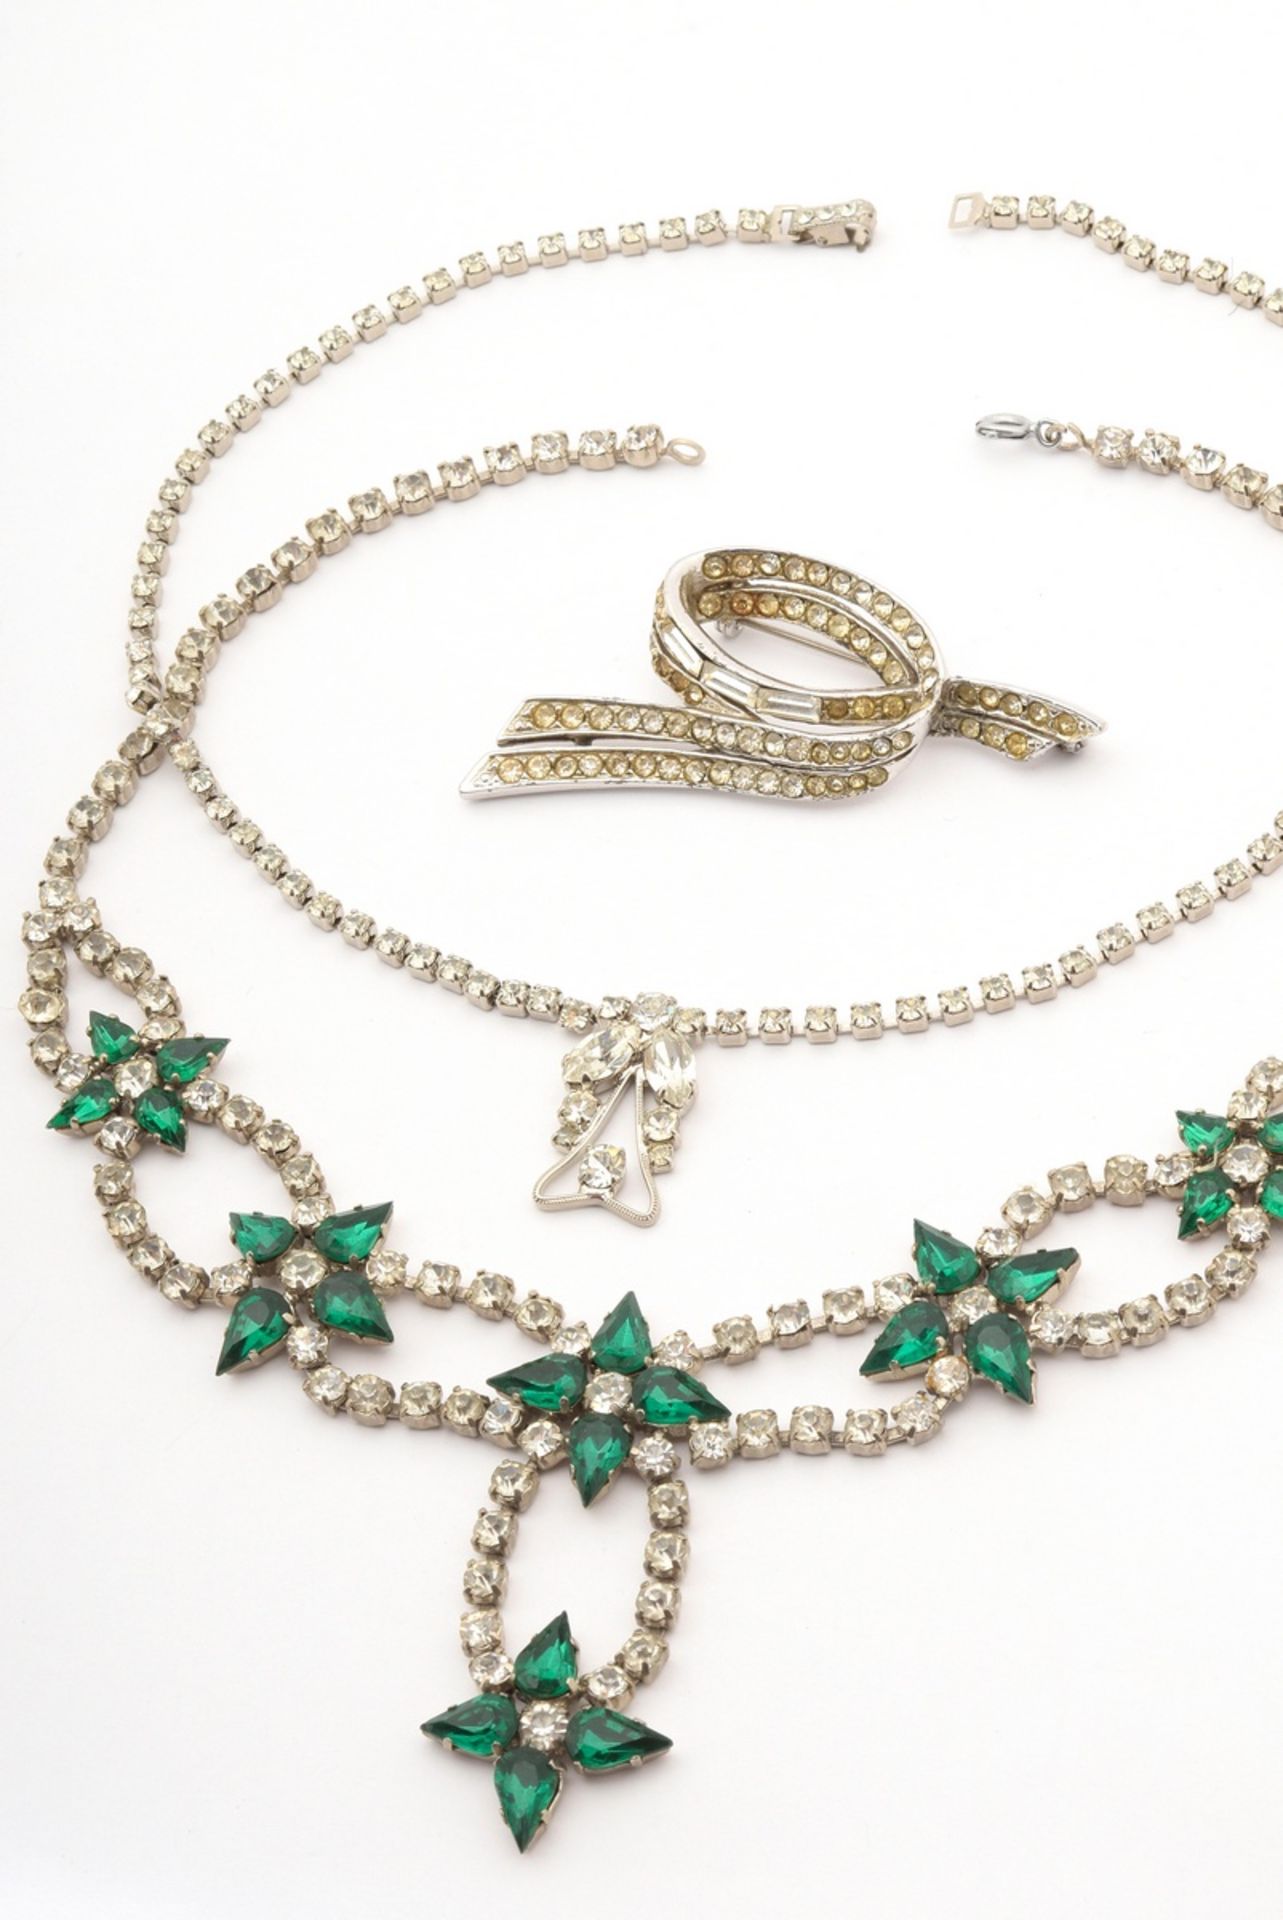 3 pieces vintage costume jewellery in white metal with green and white rhinestones: 1x star necklac